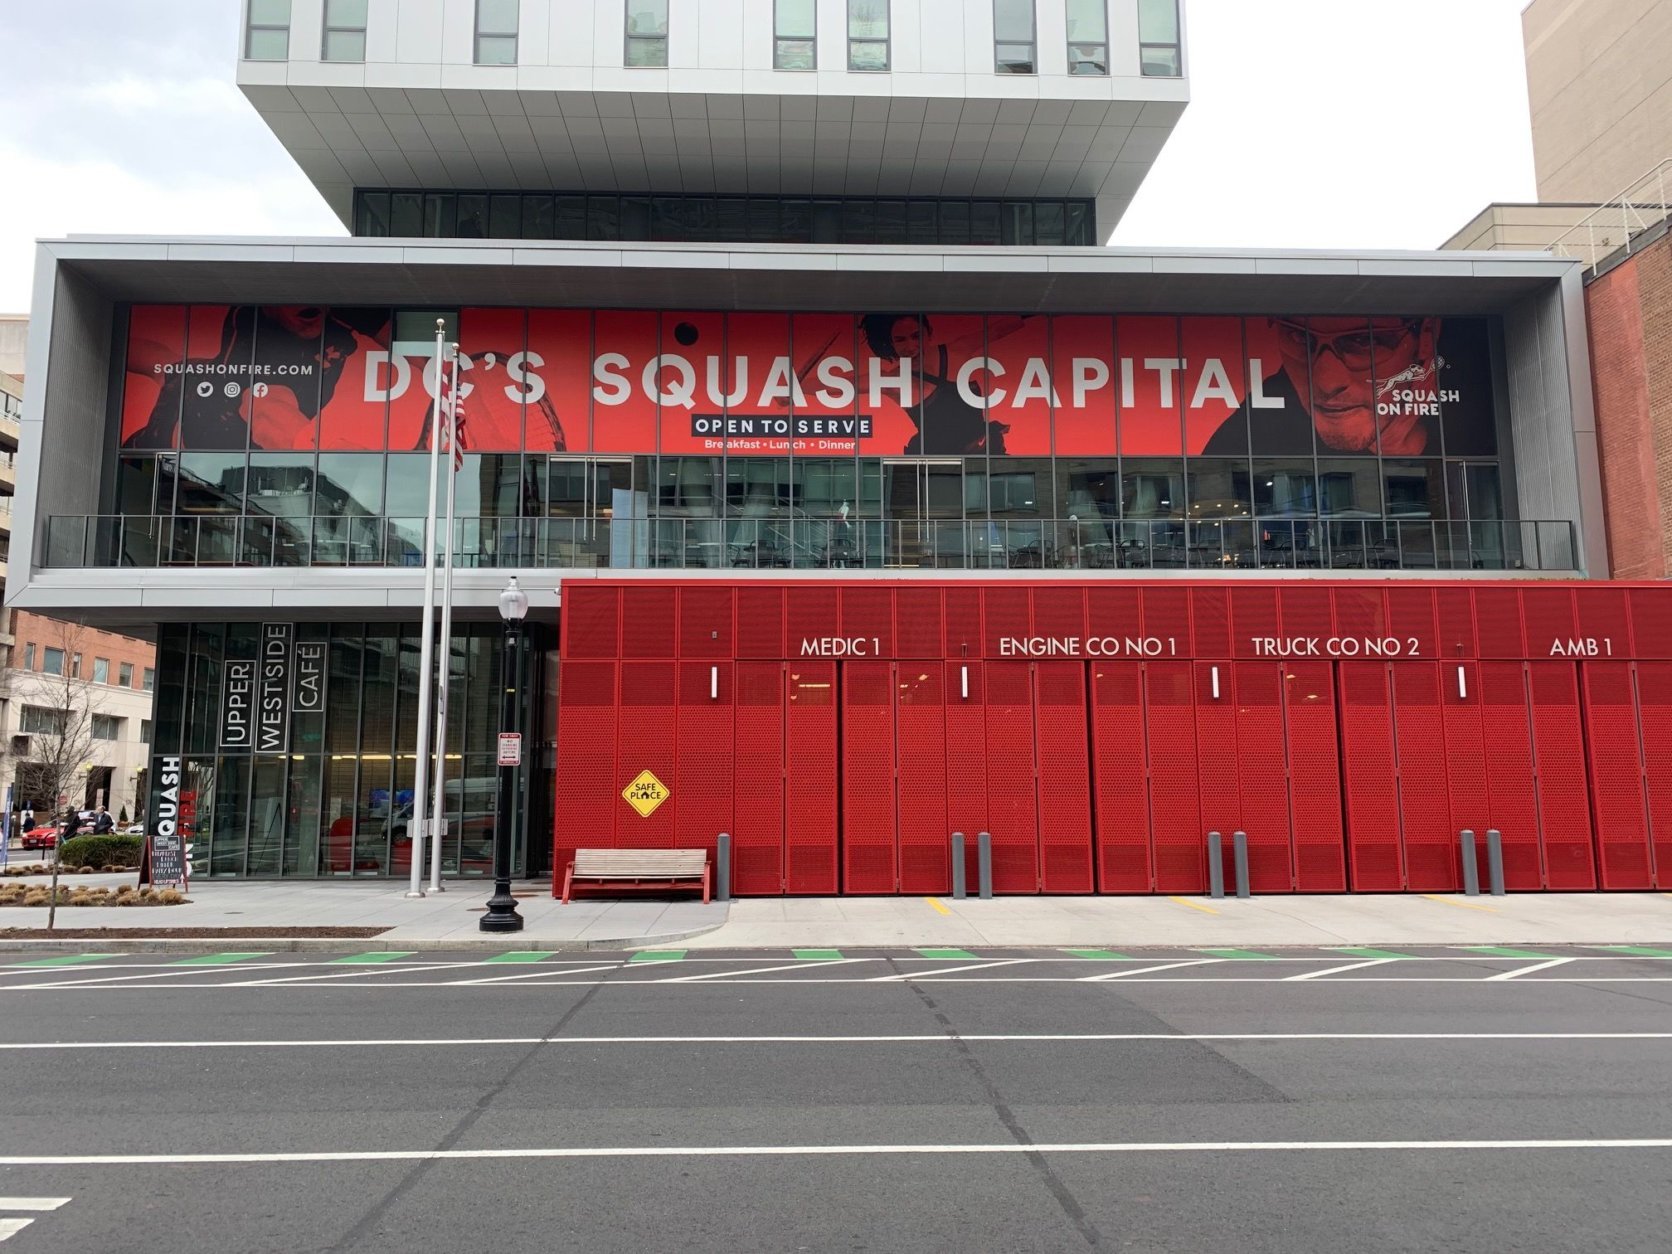 Squash on Fire, a public facility, opened in 2017 on M St. NW in West End. (WTOP/Noah Frank)